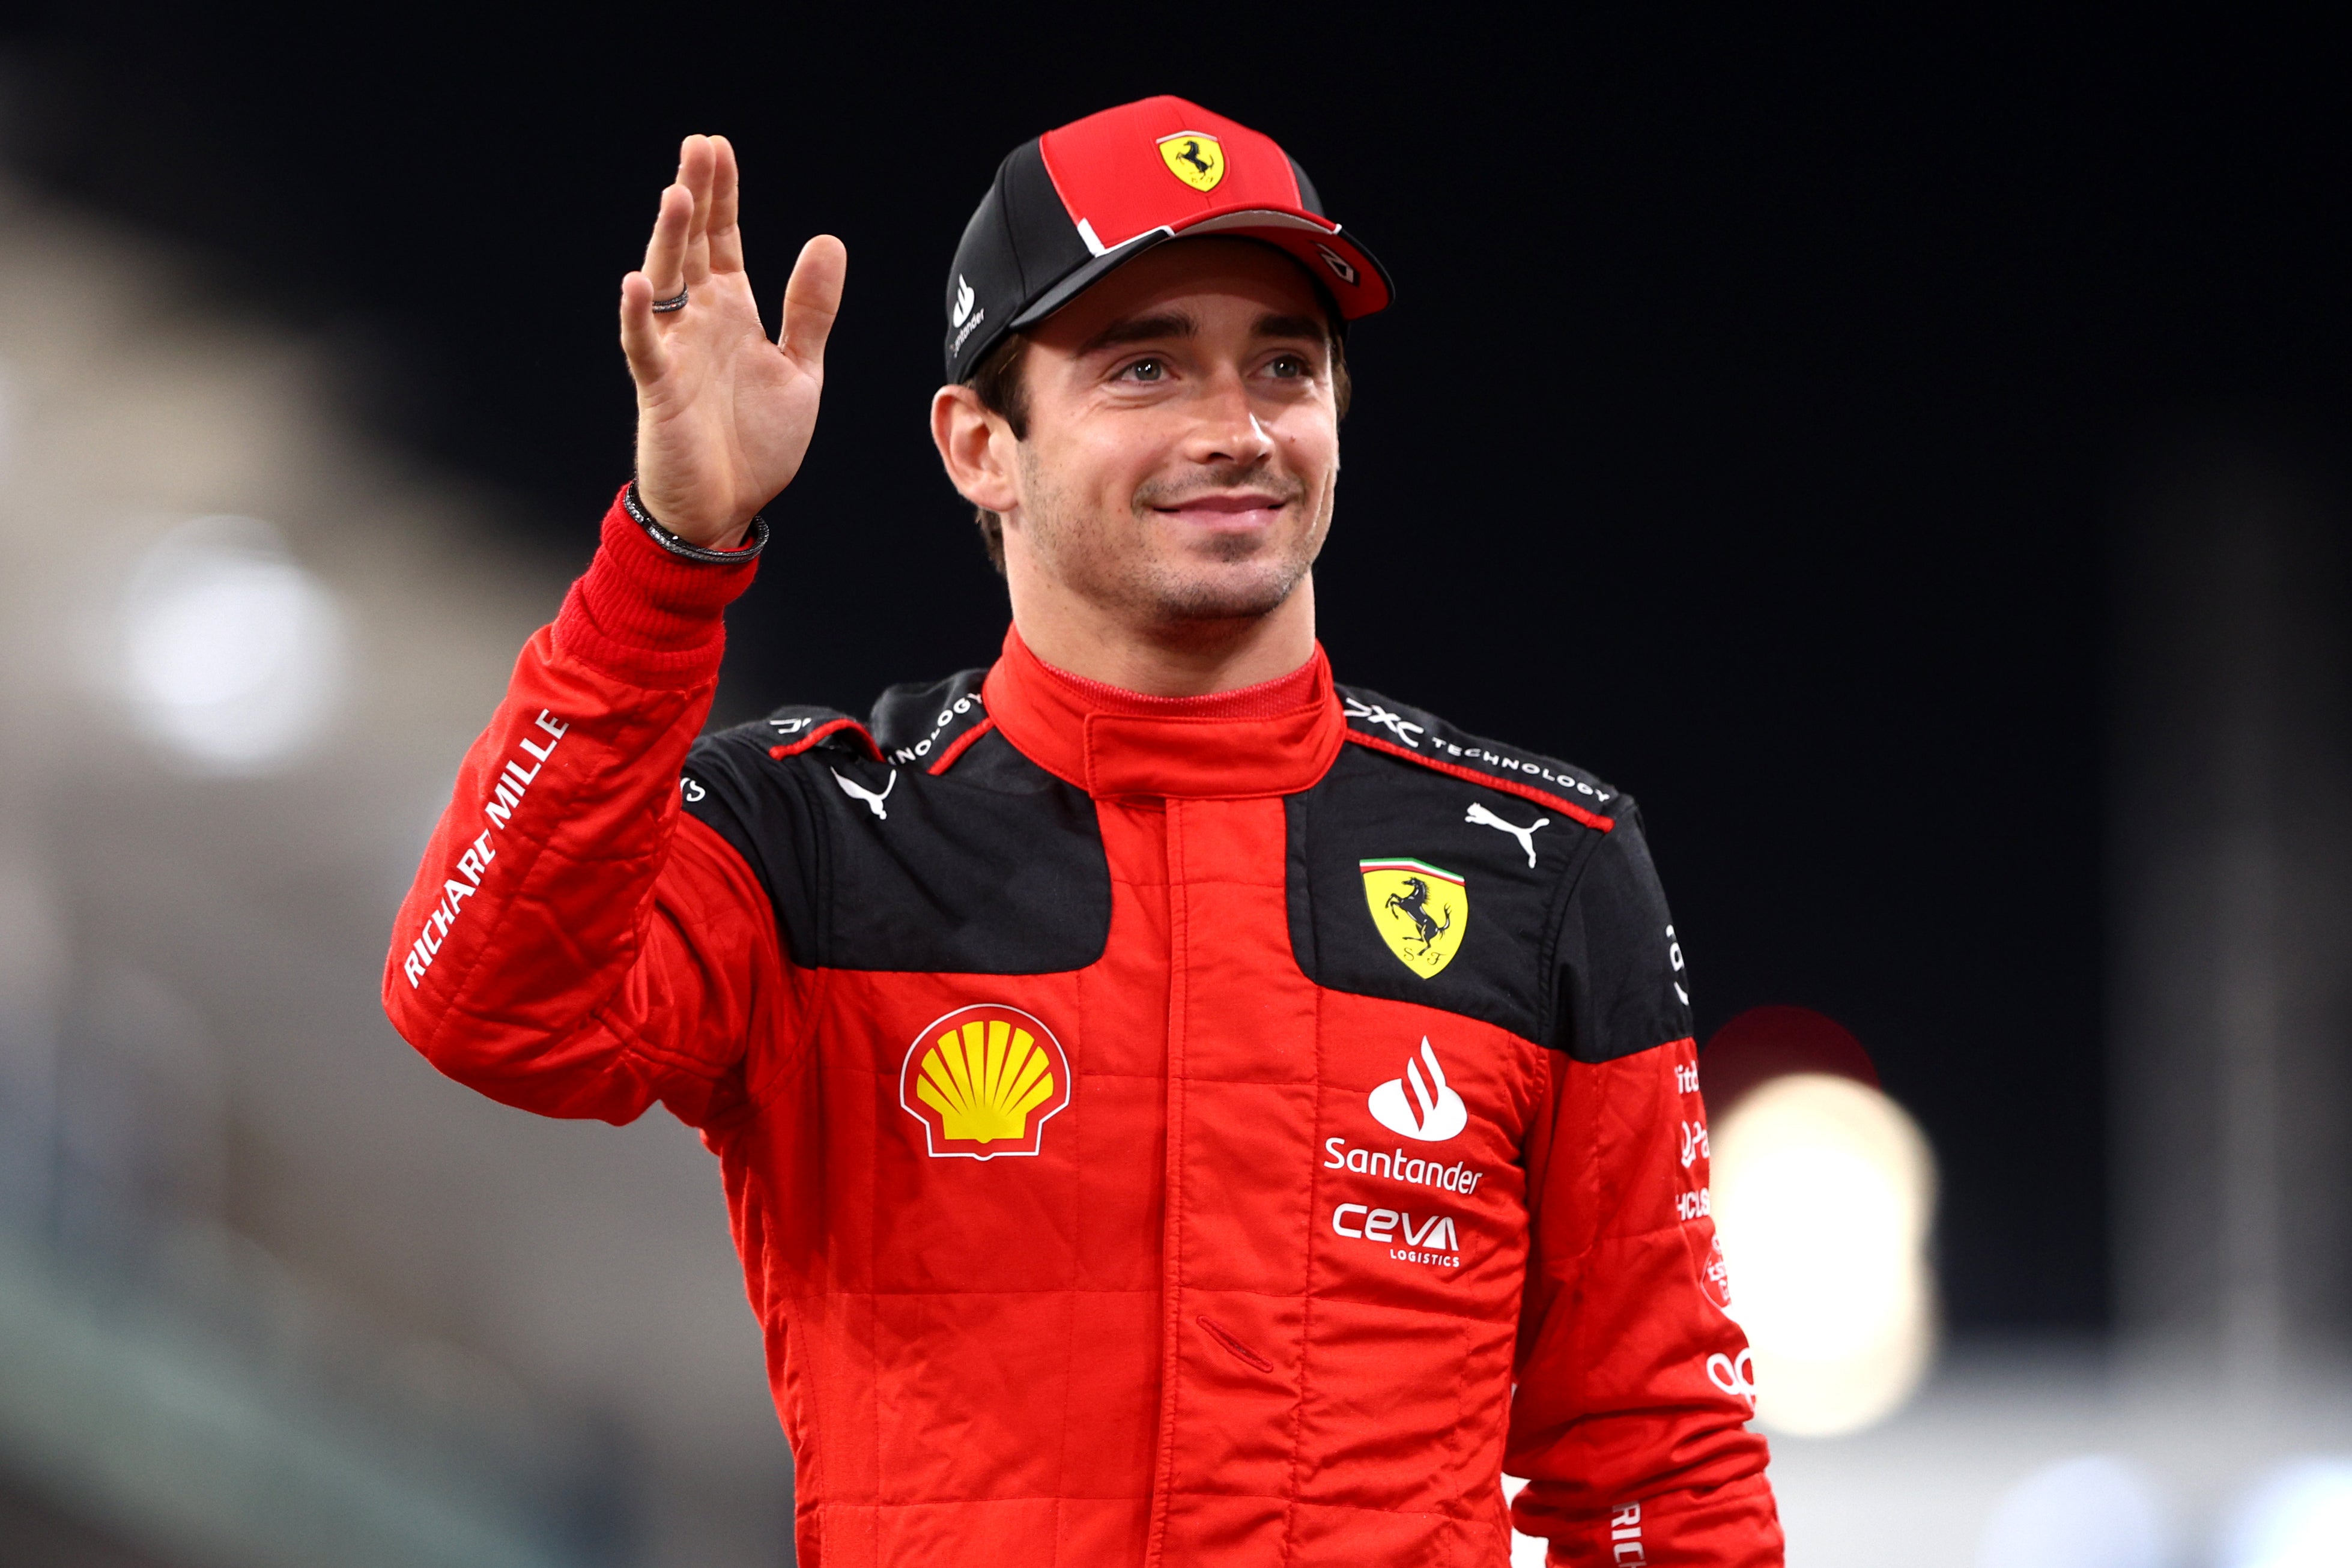 Charles Leclerc will feature in season six of Drive to Survive